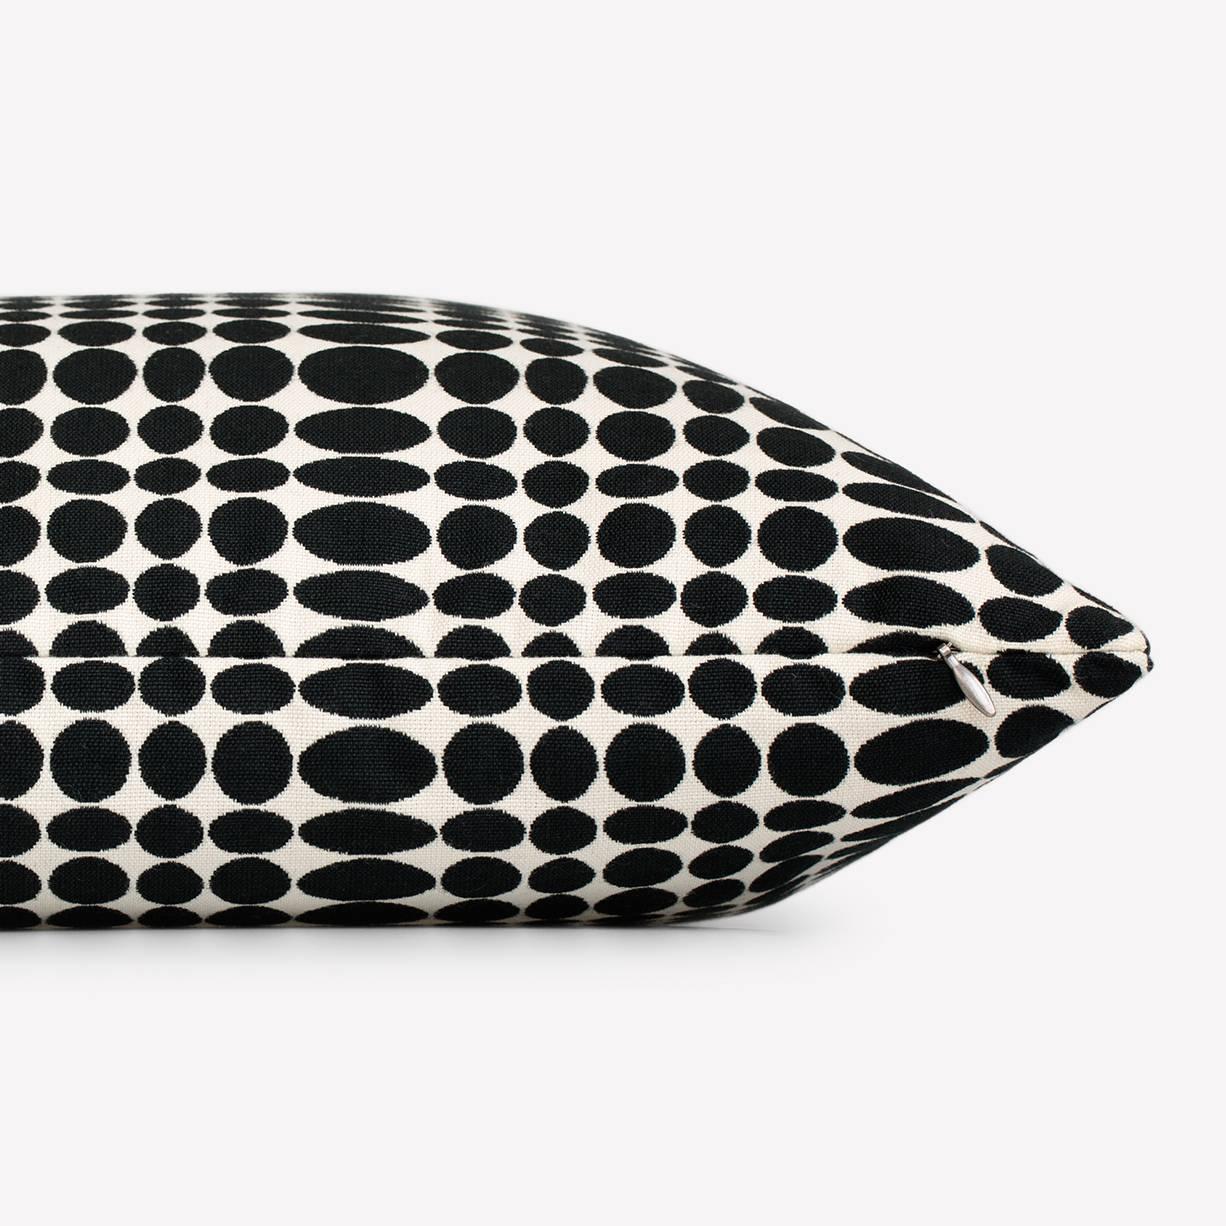 Maharam pillow
Unisol by Verner Panton
001 black/white

Created by Verner Panton in 1965, Unisol is a graphic pattern featuring rows of black ellipses on a white round. The ellipses are compressed in width at rhythmic intervals, creating an optical